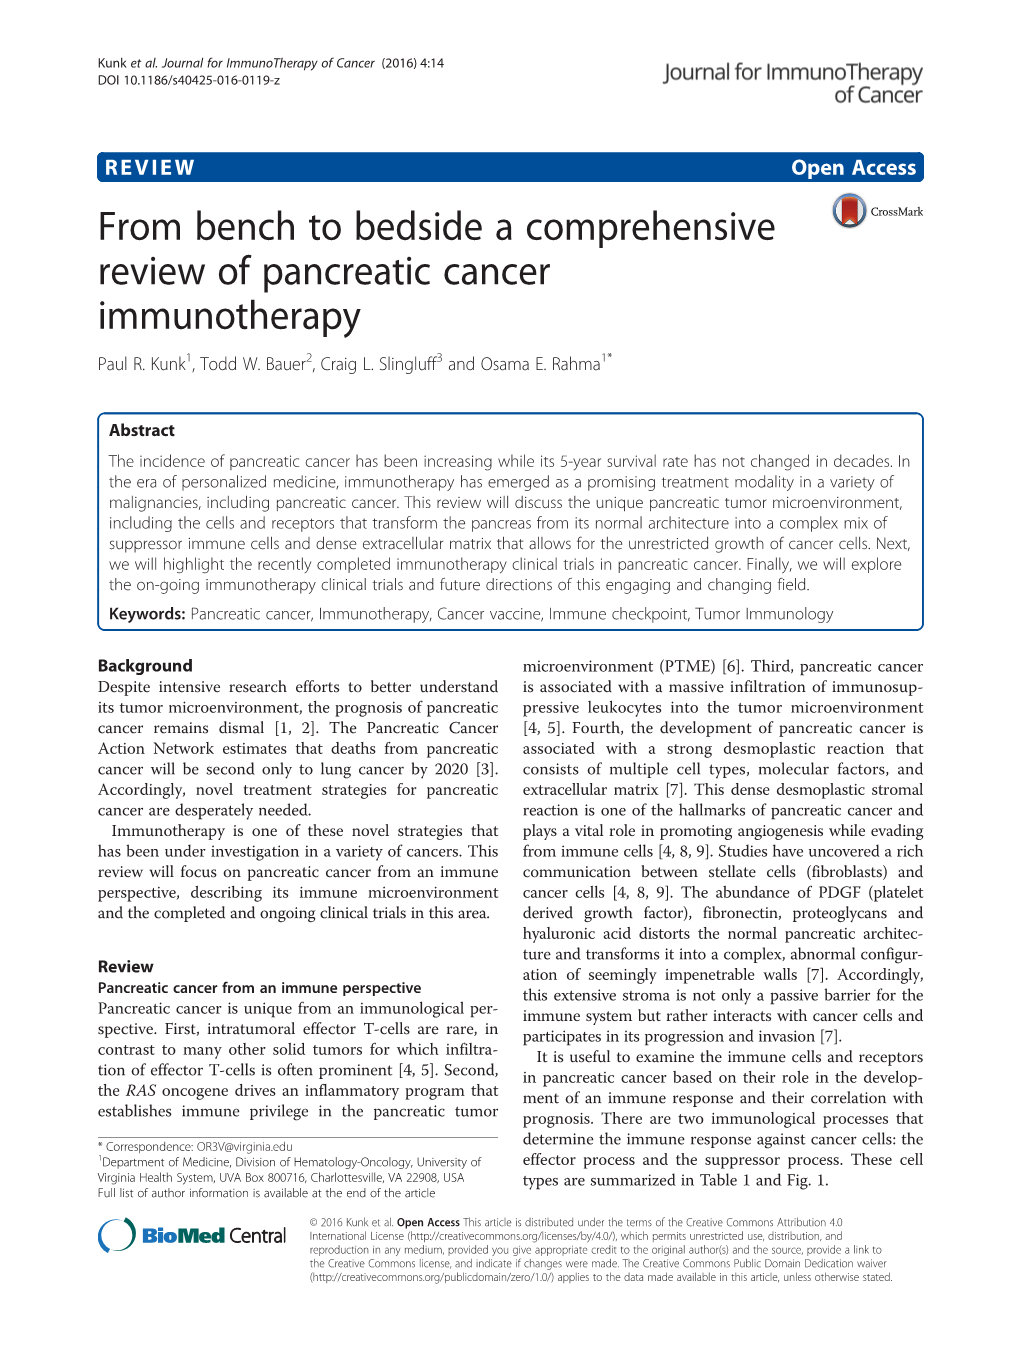 From Bench to Bedside a Comprehensive Review of Pancreatic Cancer Immunotherapy Paul R